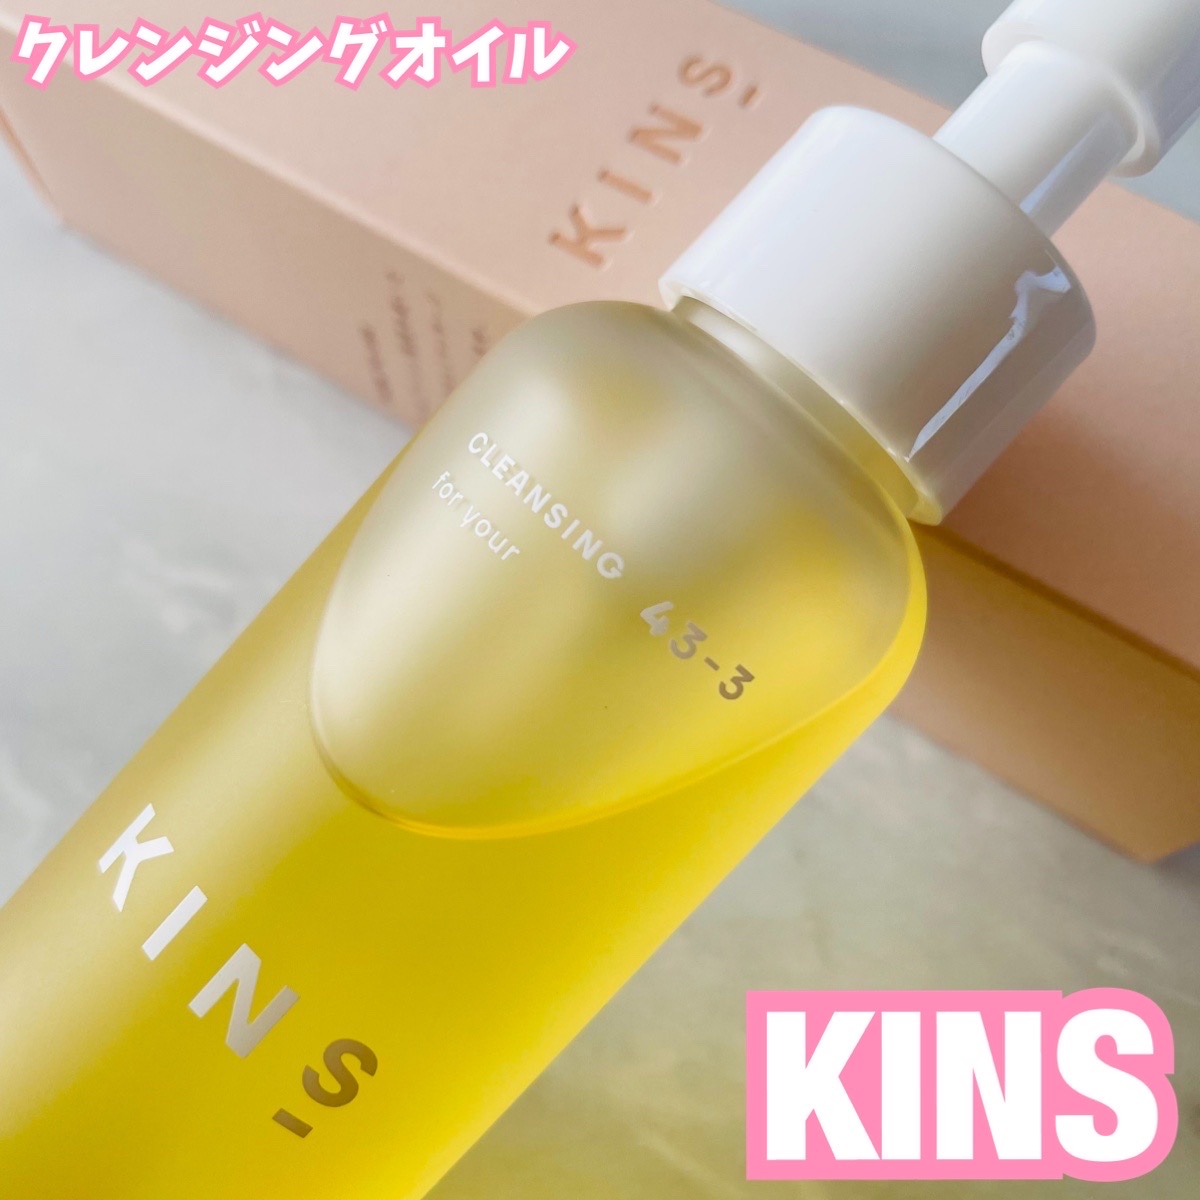 KINS / KINS CLEANSING OILの公式商品情報｜美容・化粧品情報はアット